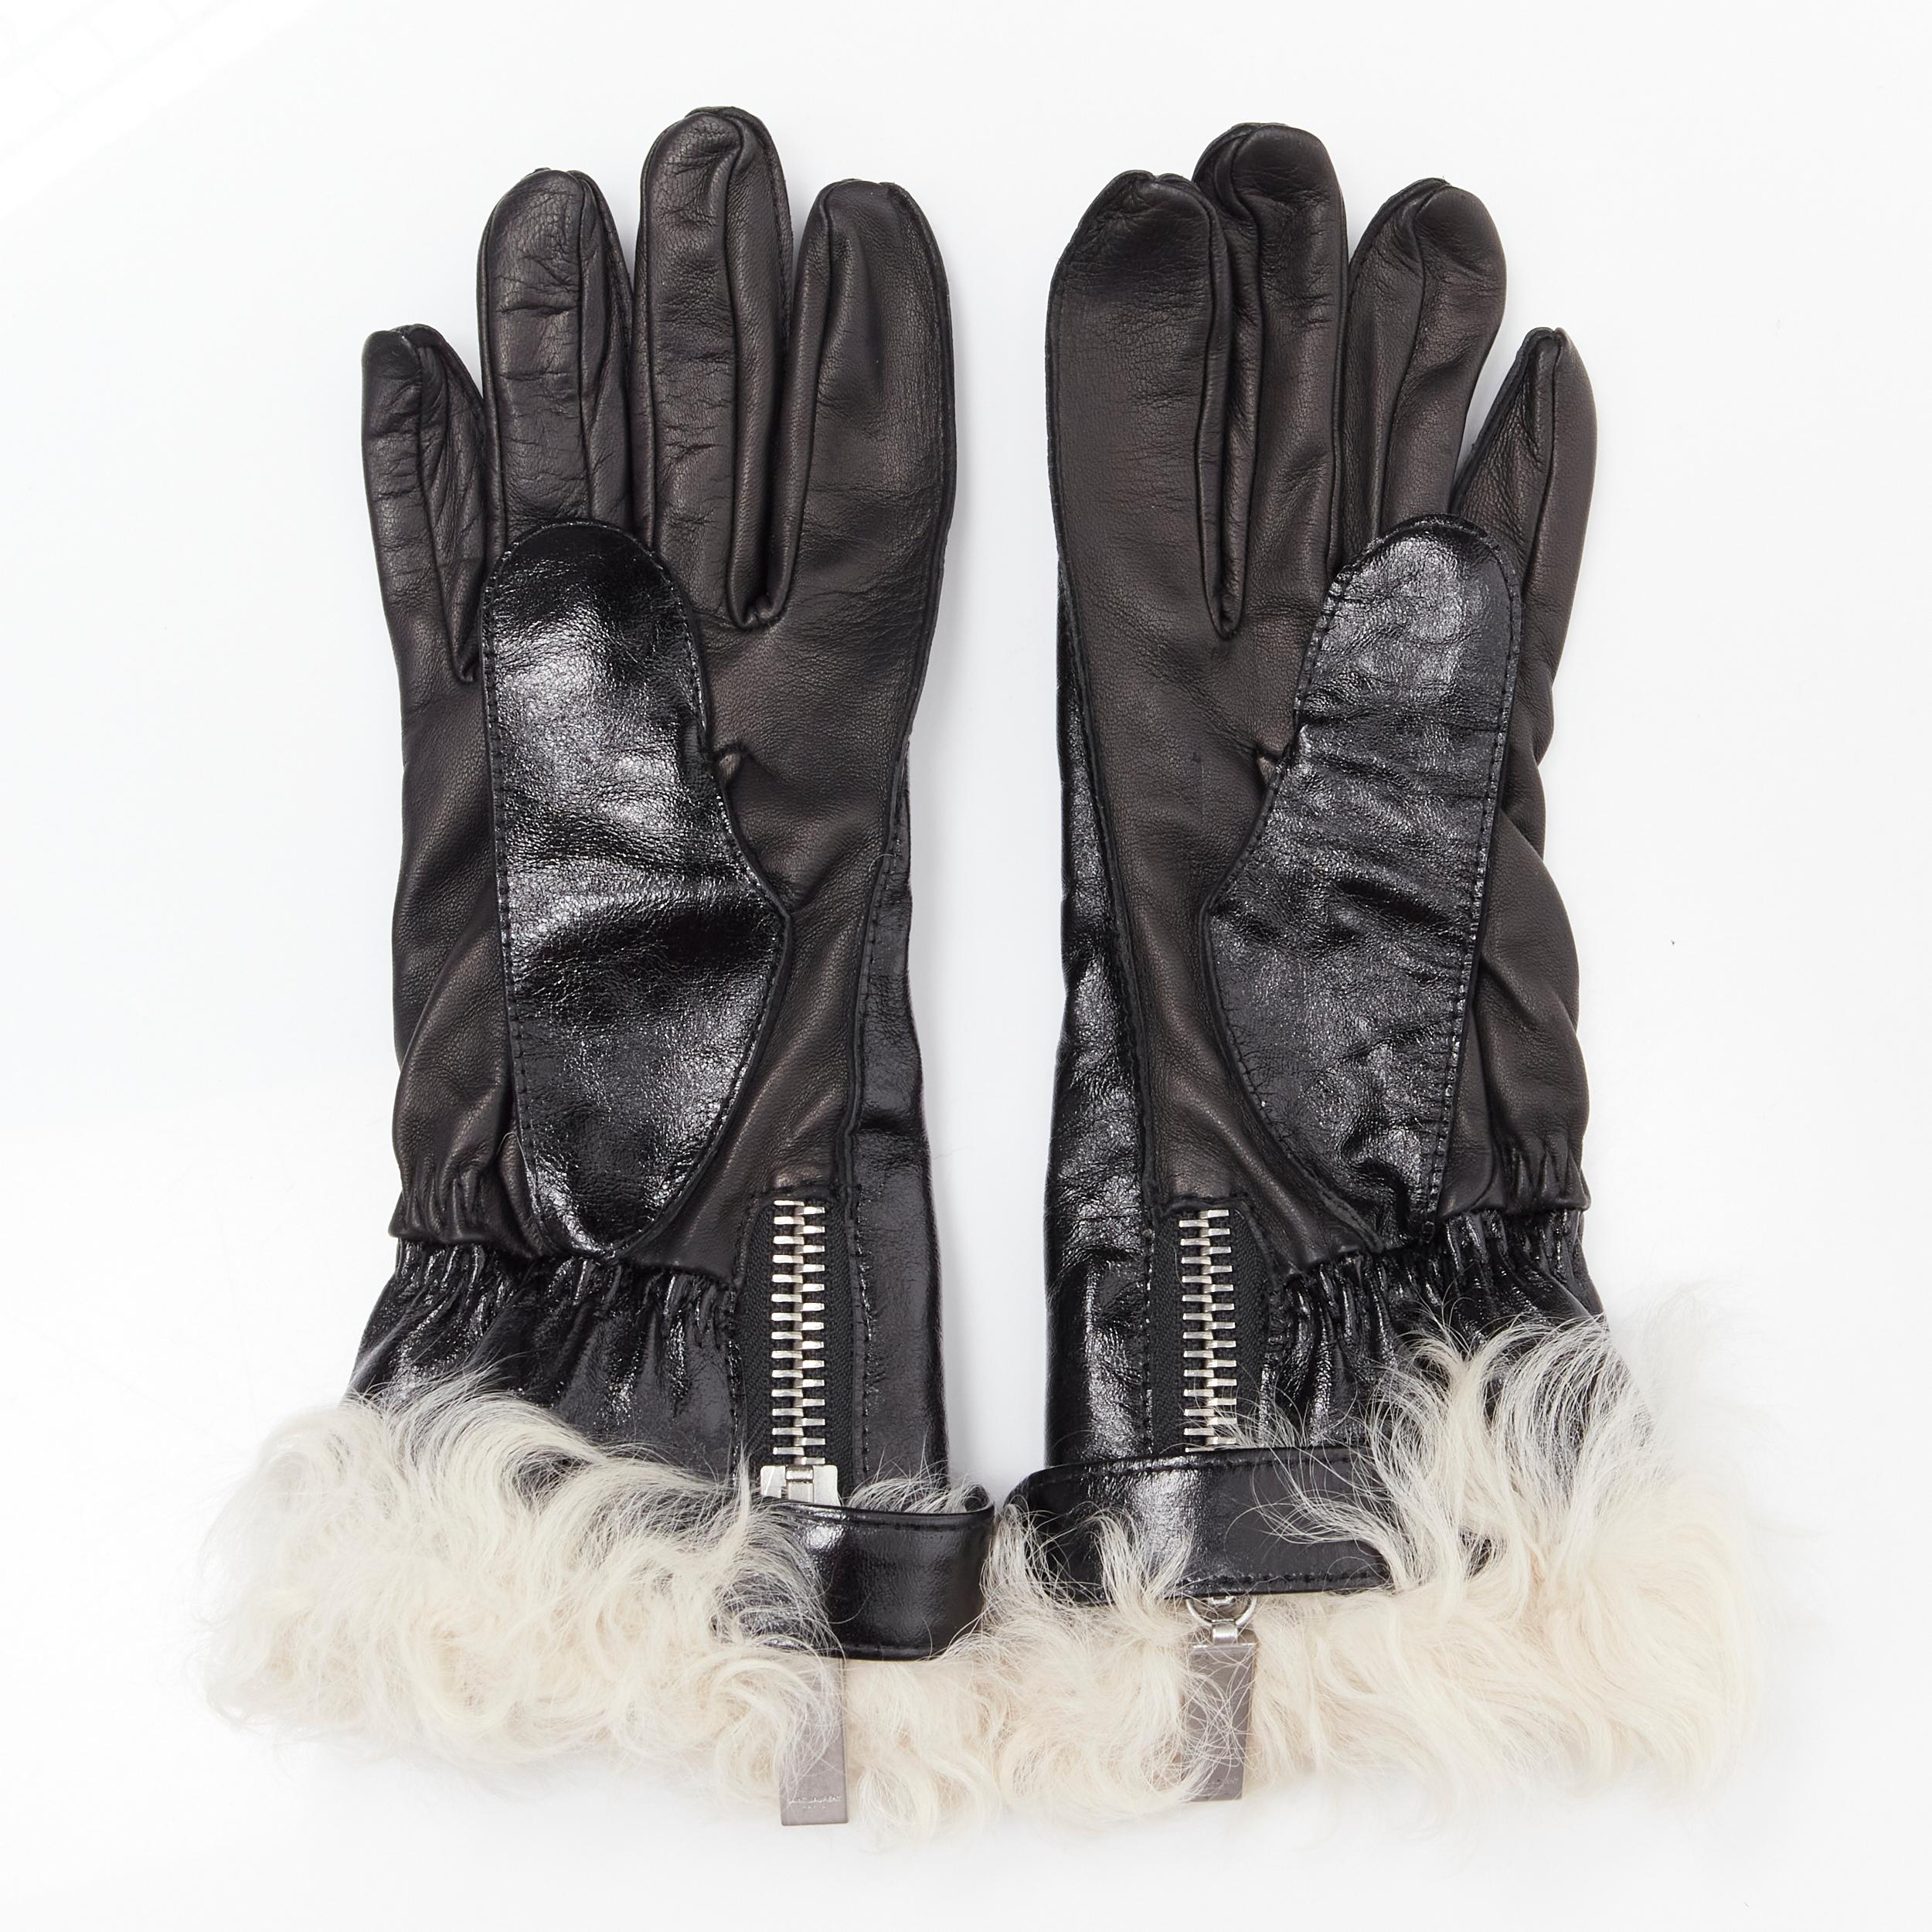 SAINT LAURENT 2017 black calf patent leather shearling lined biker glove 
Reference: MELK/A00165 
Brand: Saint Laurent 
Collection: 2017 
Material: Patent Leather 
Color: Black 
Pattern: Solid 
Closure: Zip 
Extra Detail: Patent leather upper. Calf